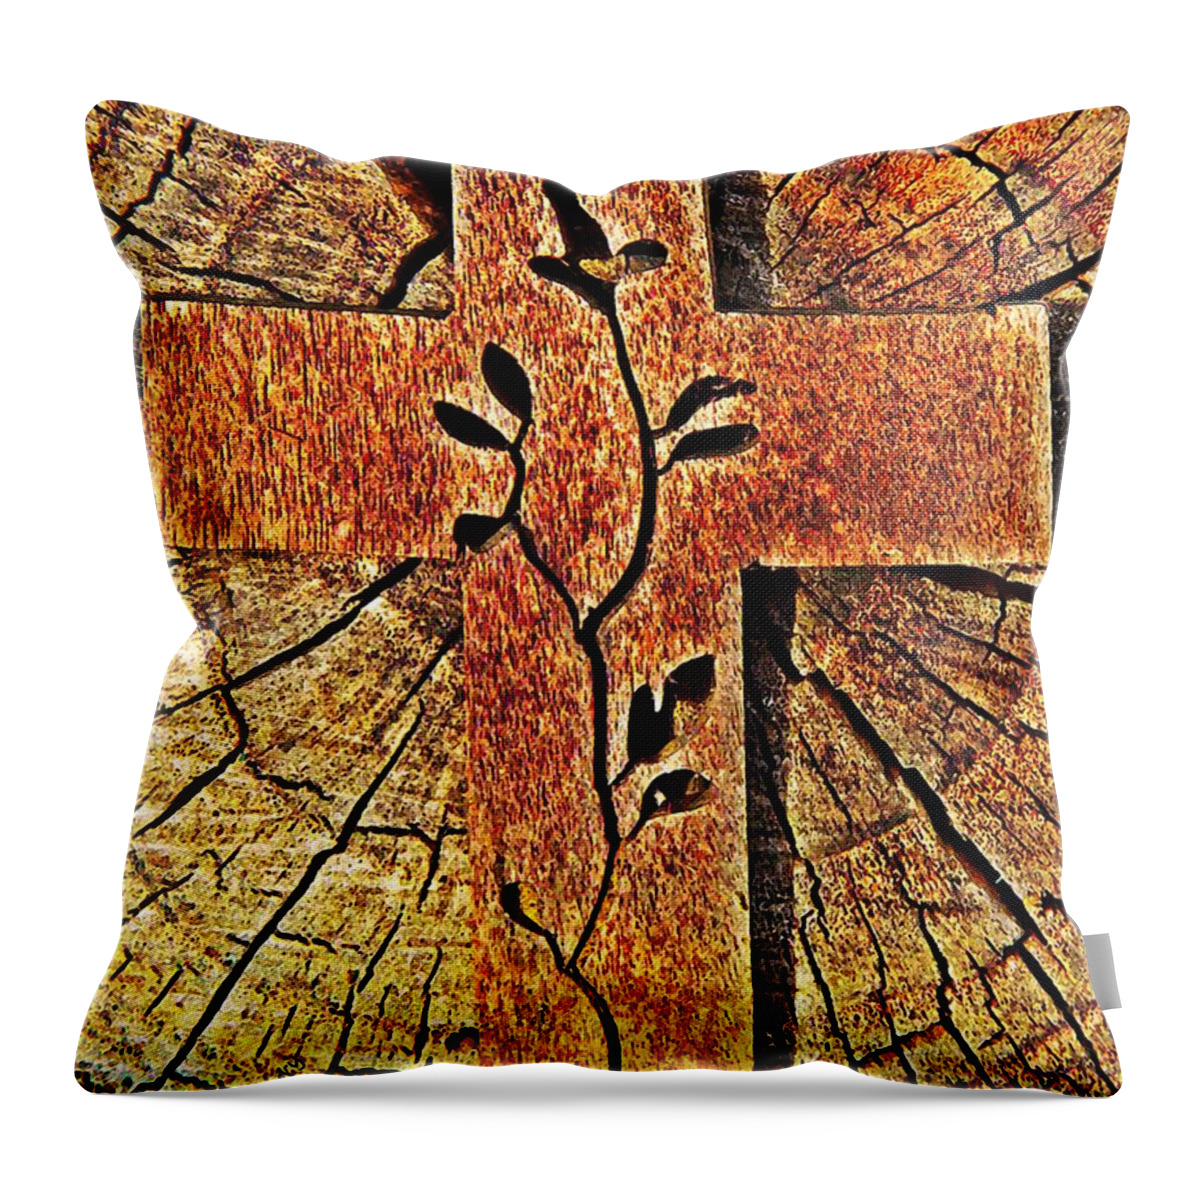 Symbol Throw Pillow featuring the photograph Returning to Dust by Chris Berry